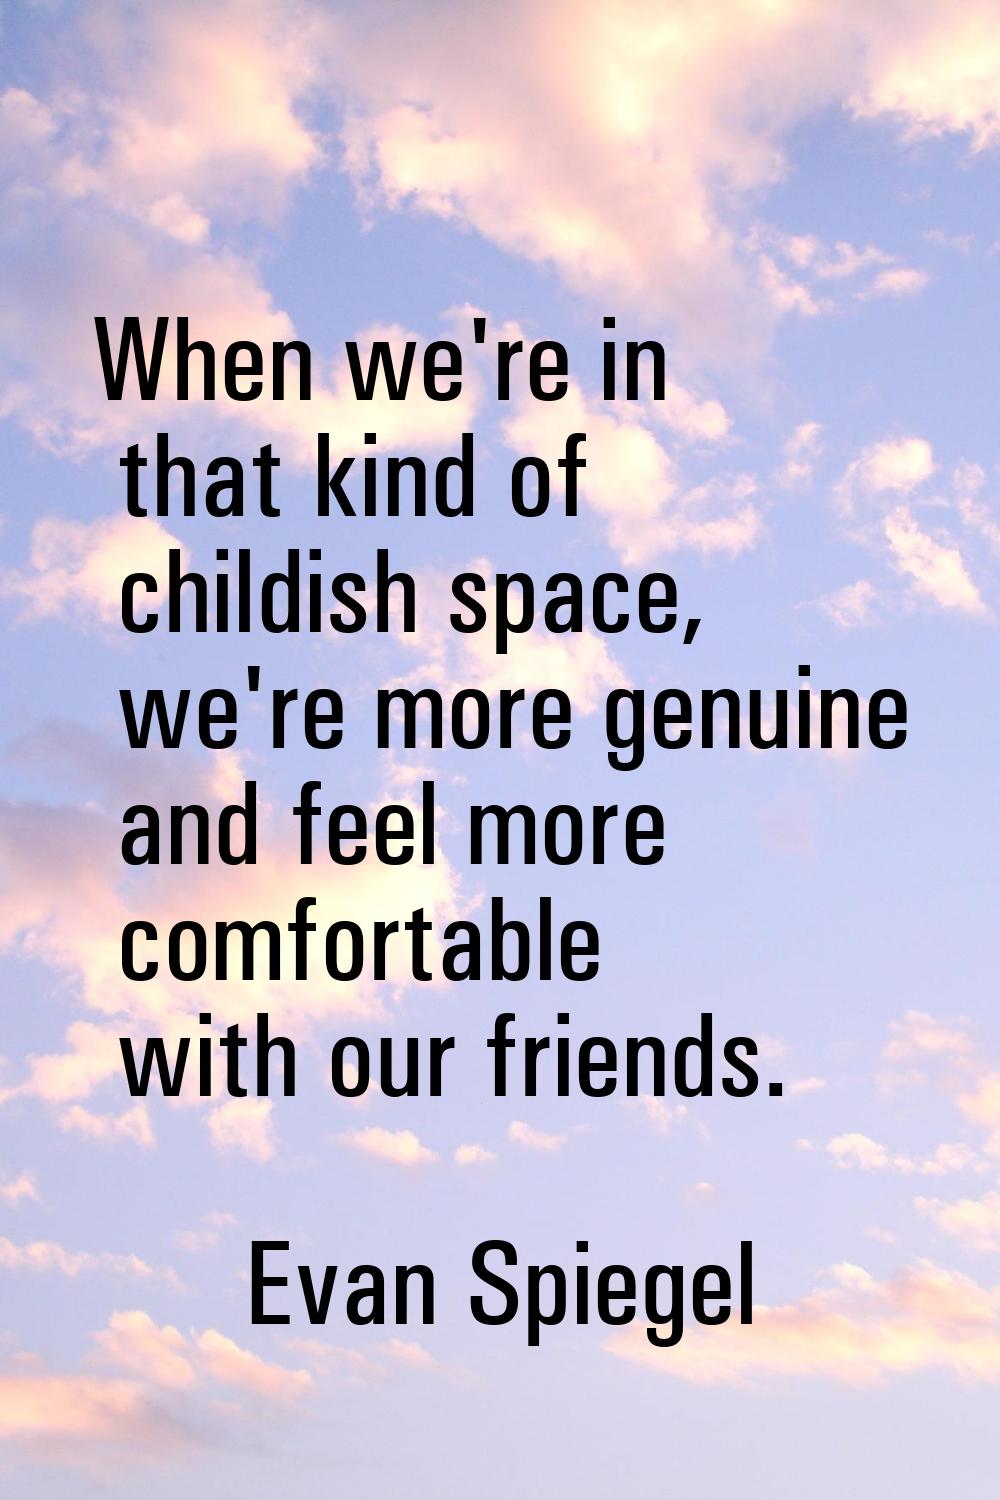 When we're in that kind of childish space, we're more genuine and feel more comfortable with our fr